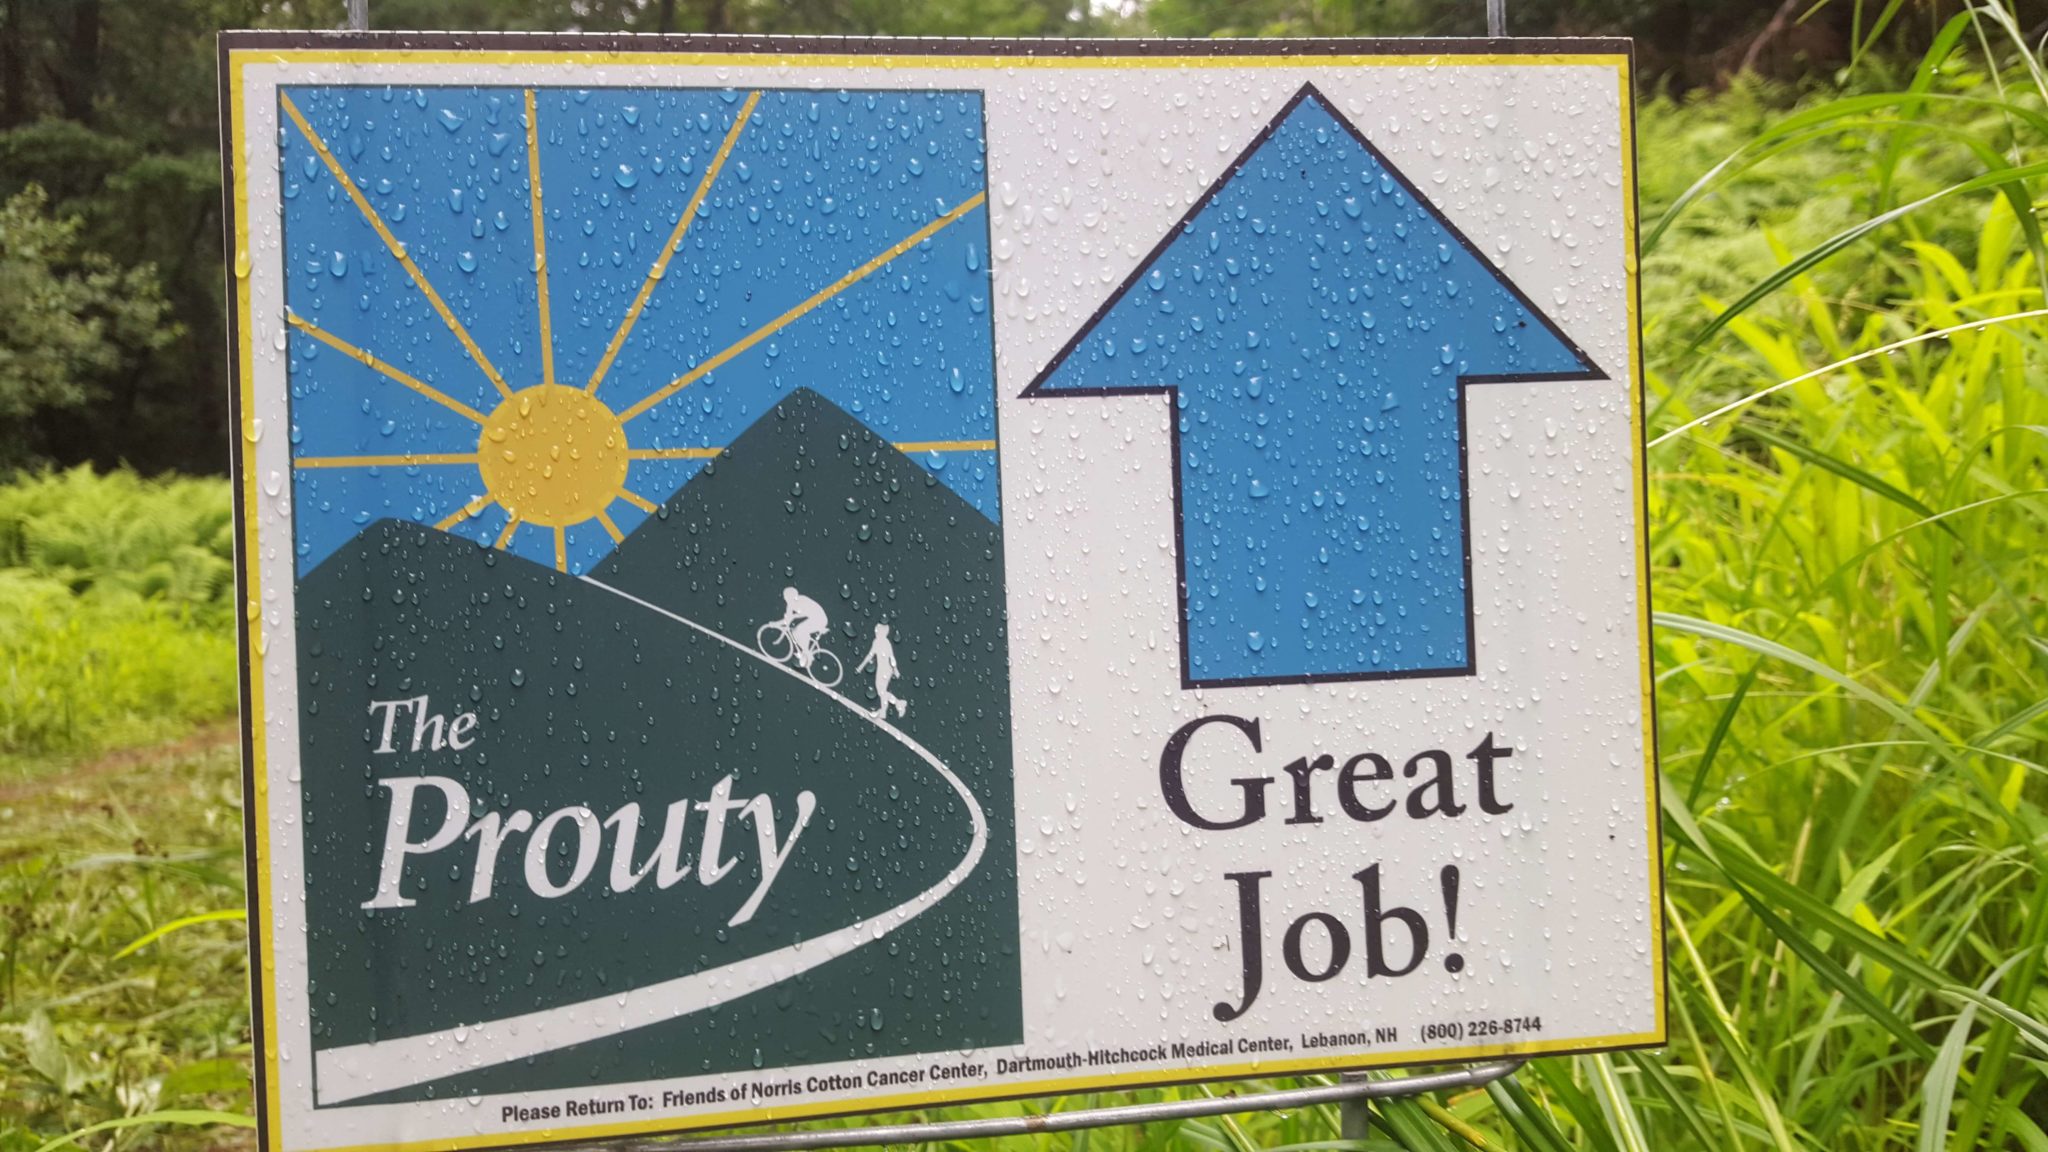 The Prouty - Great Job Sign